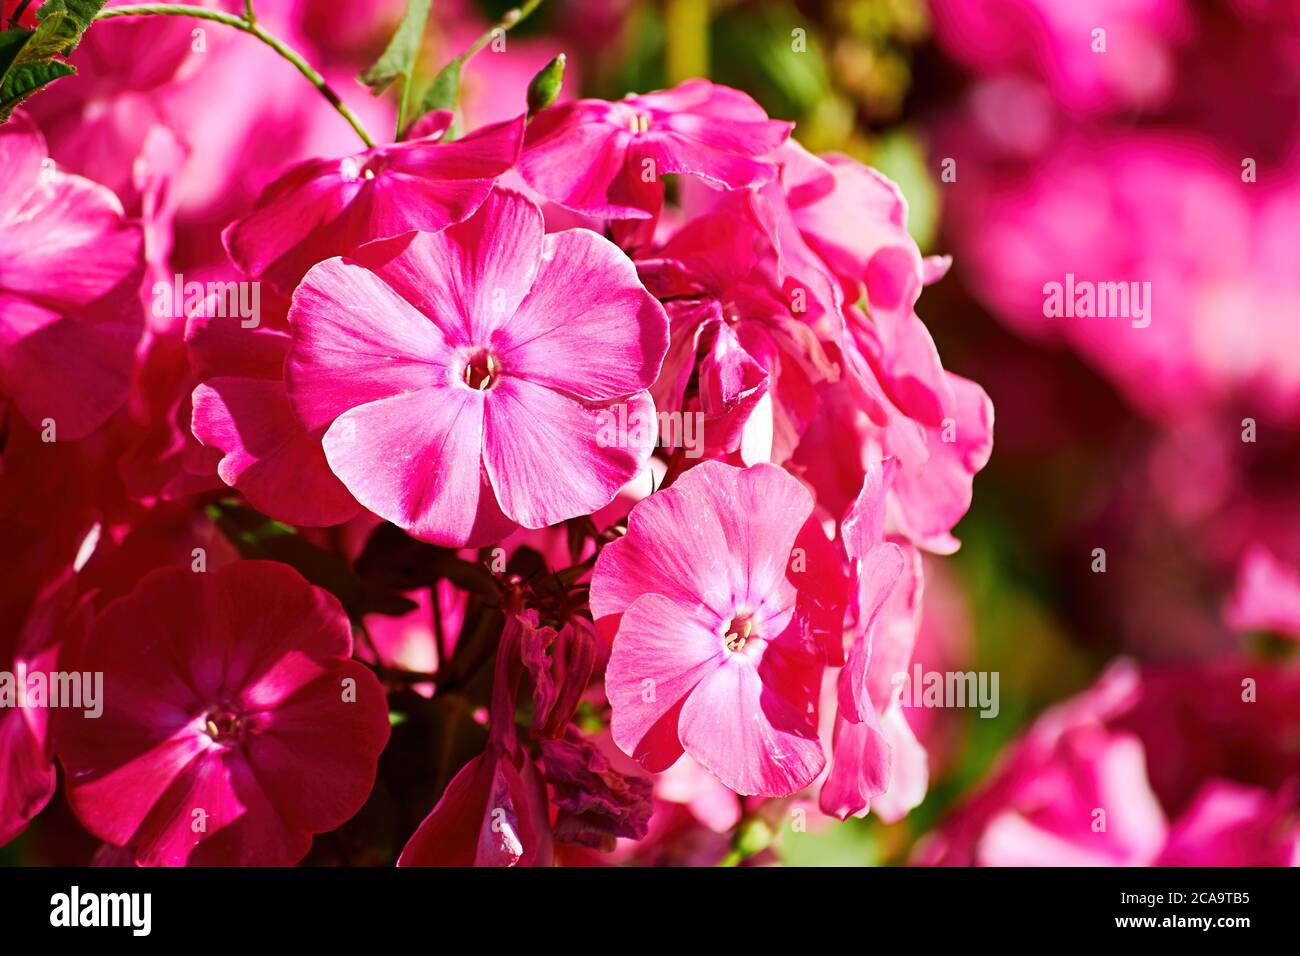 Pink phlox flower bouquet with blurred background. Floral backdrops and textures Stock Photo